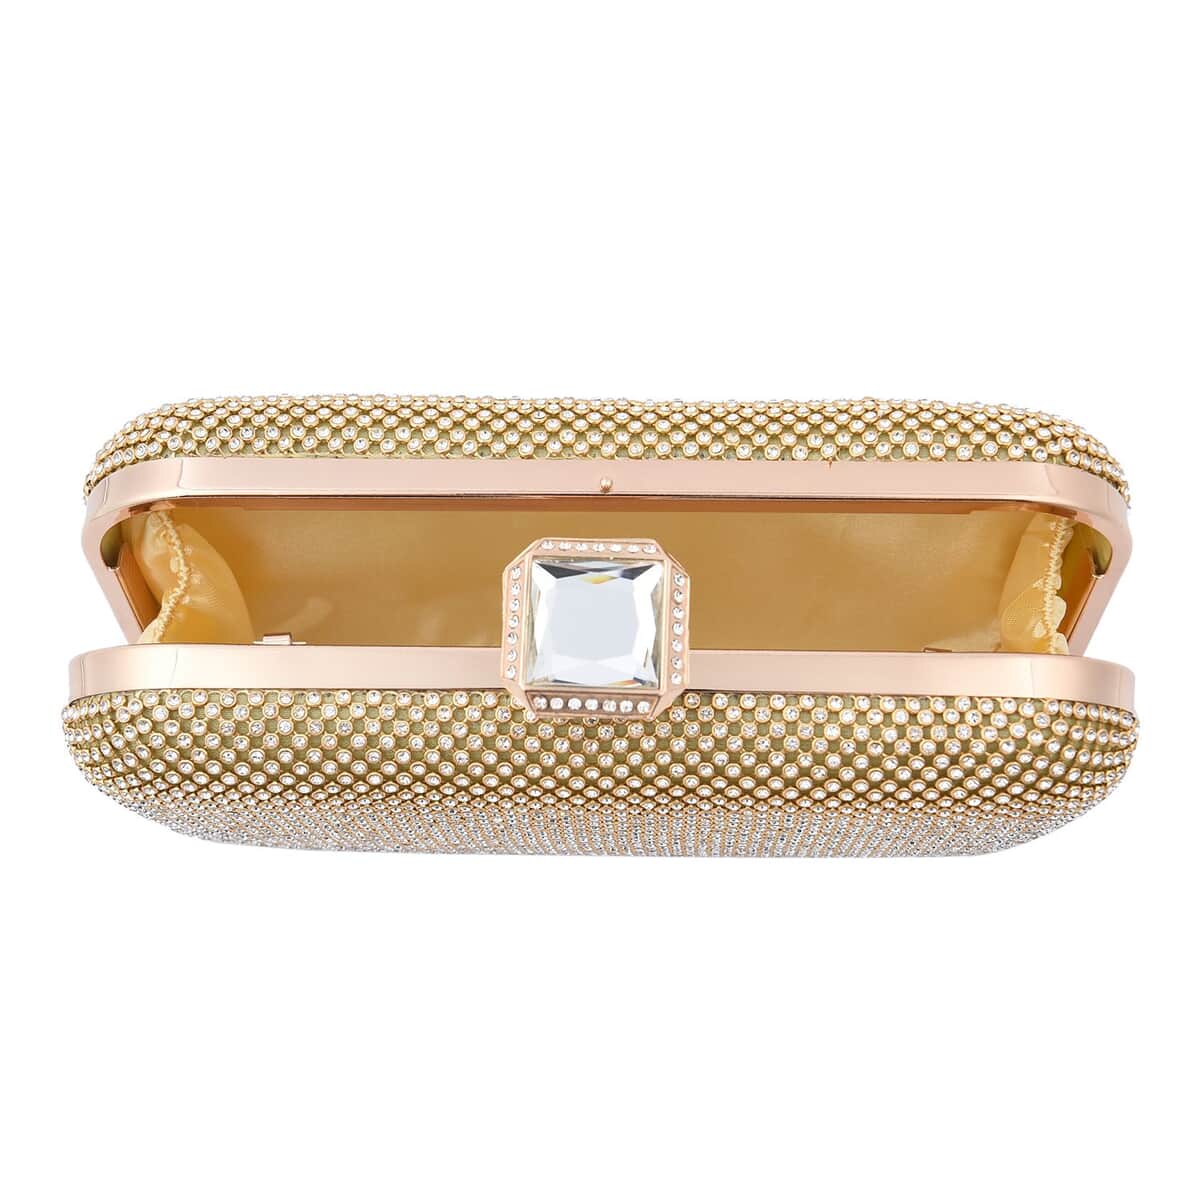 Gold Color Crystal Clutch Bag with 47 Inches Chain Strap image number 6